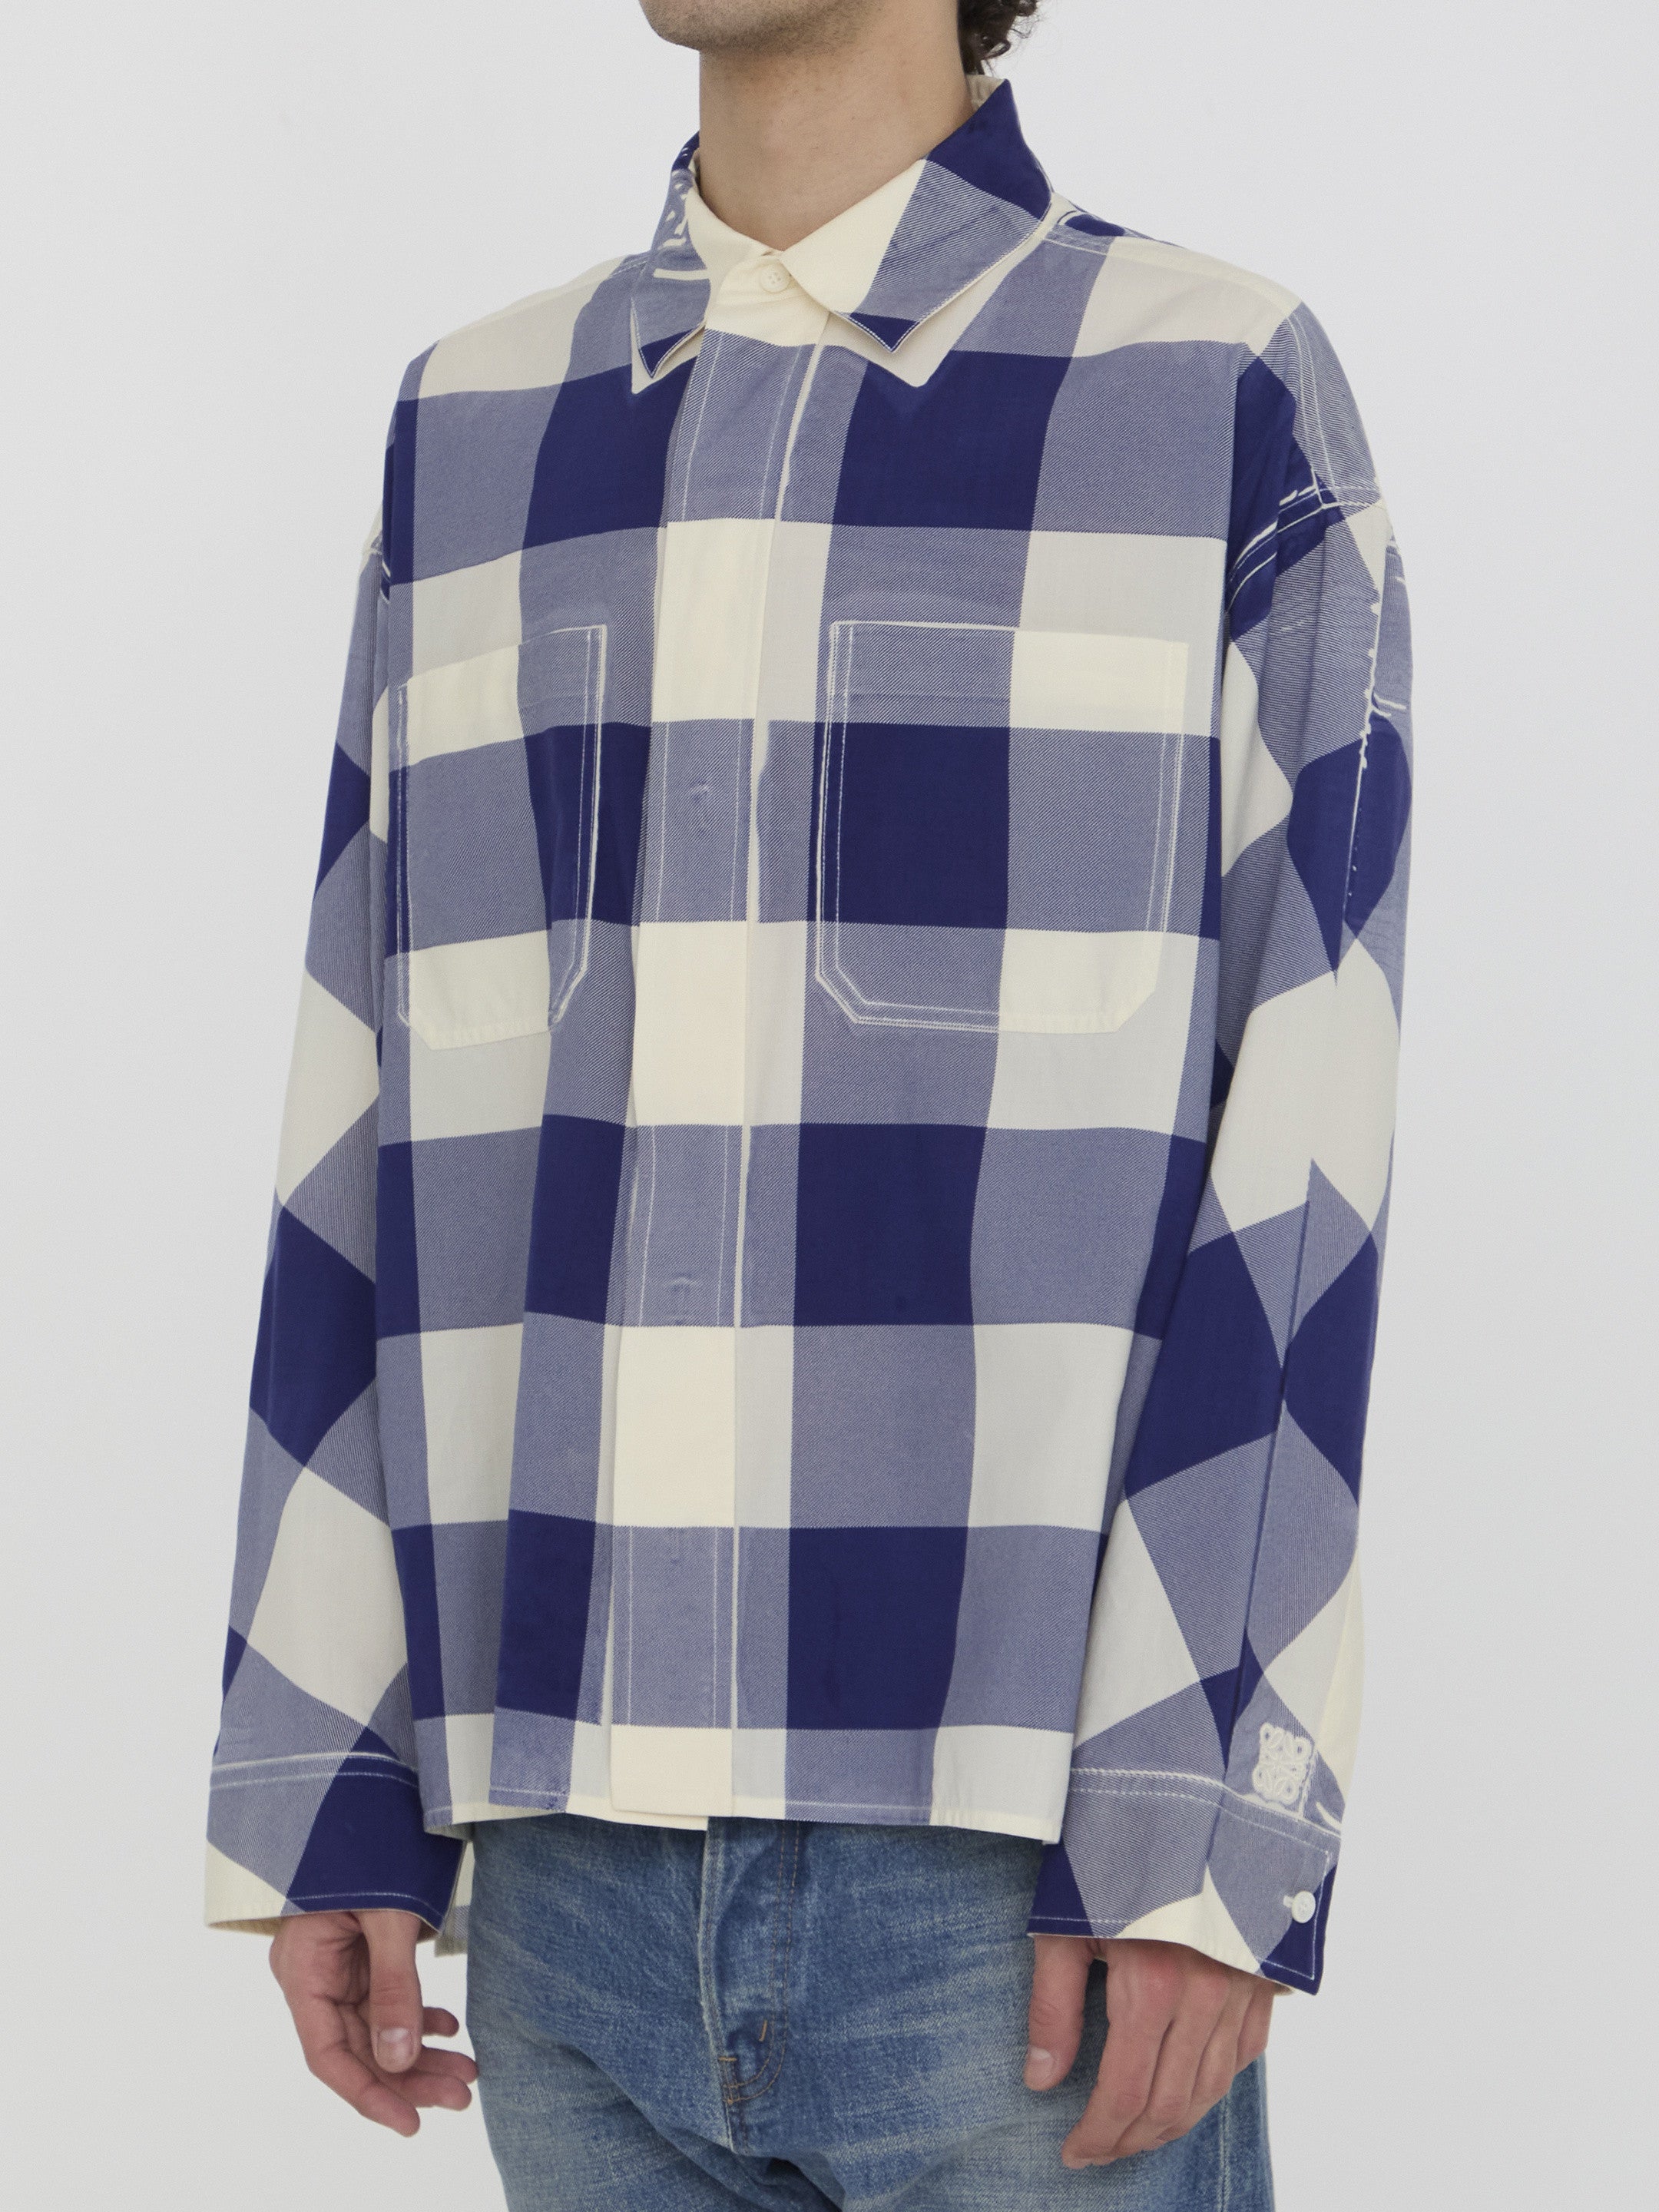 LOEWE-OUTLET-SALE-Checked-shirt-Shirts-ARCHIVE-COLLECTION-2.jpg